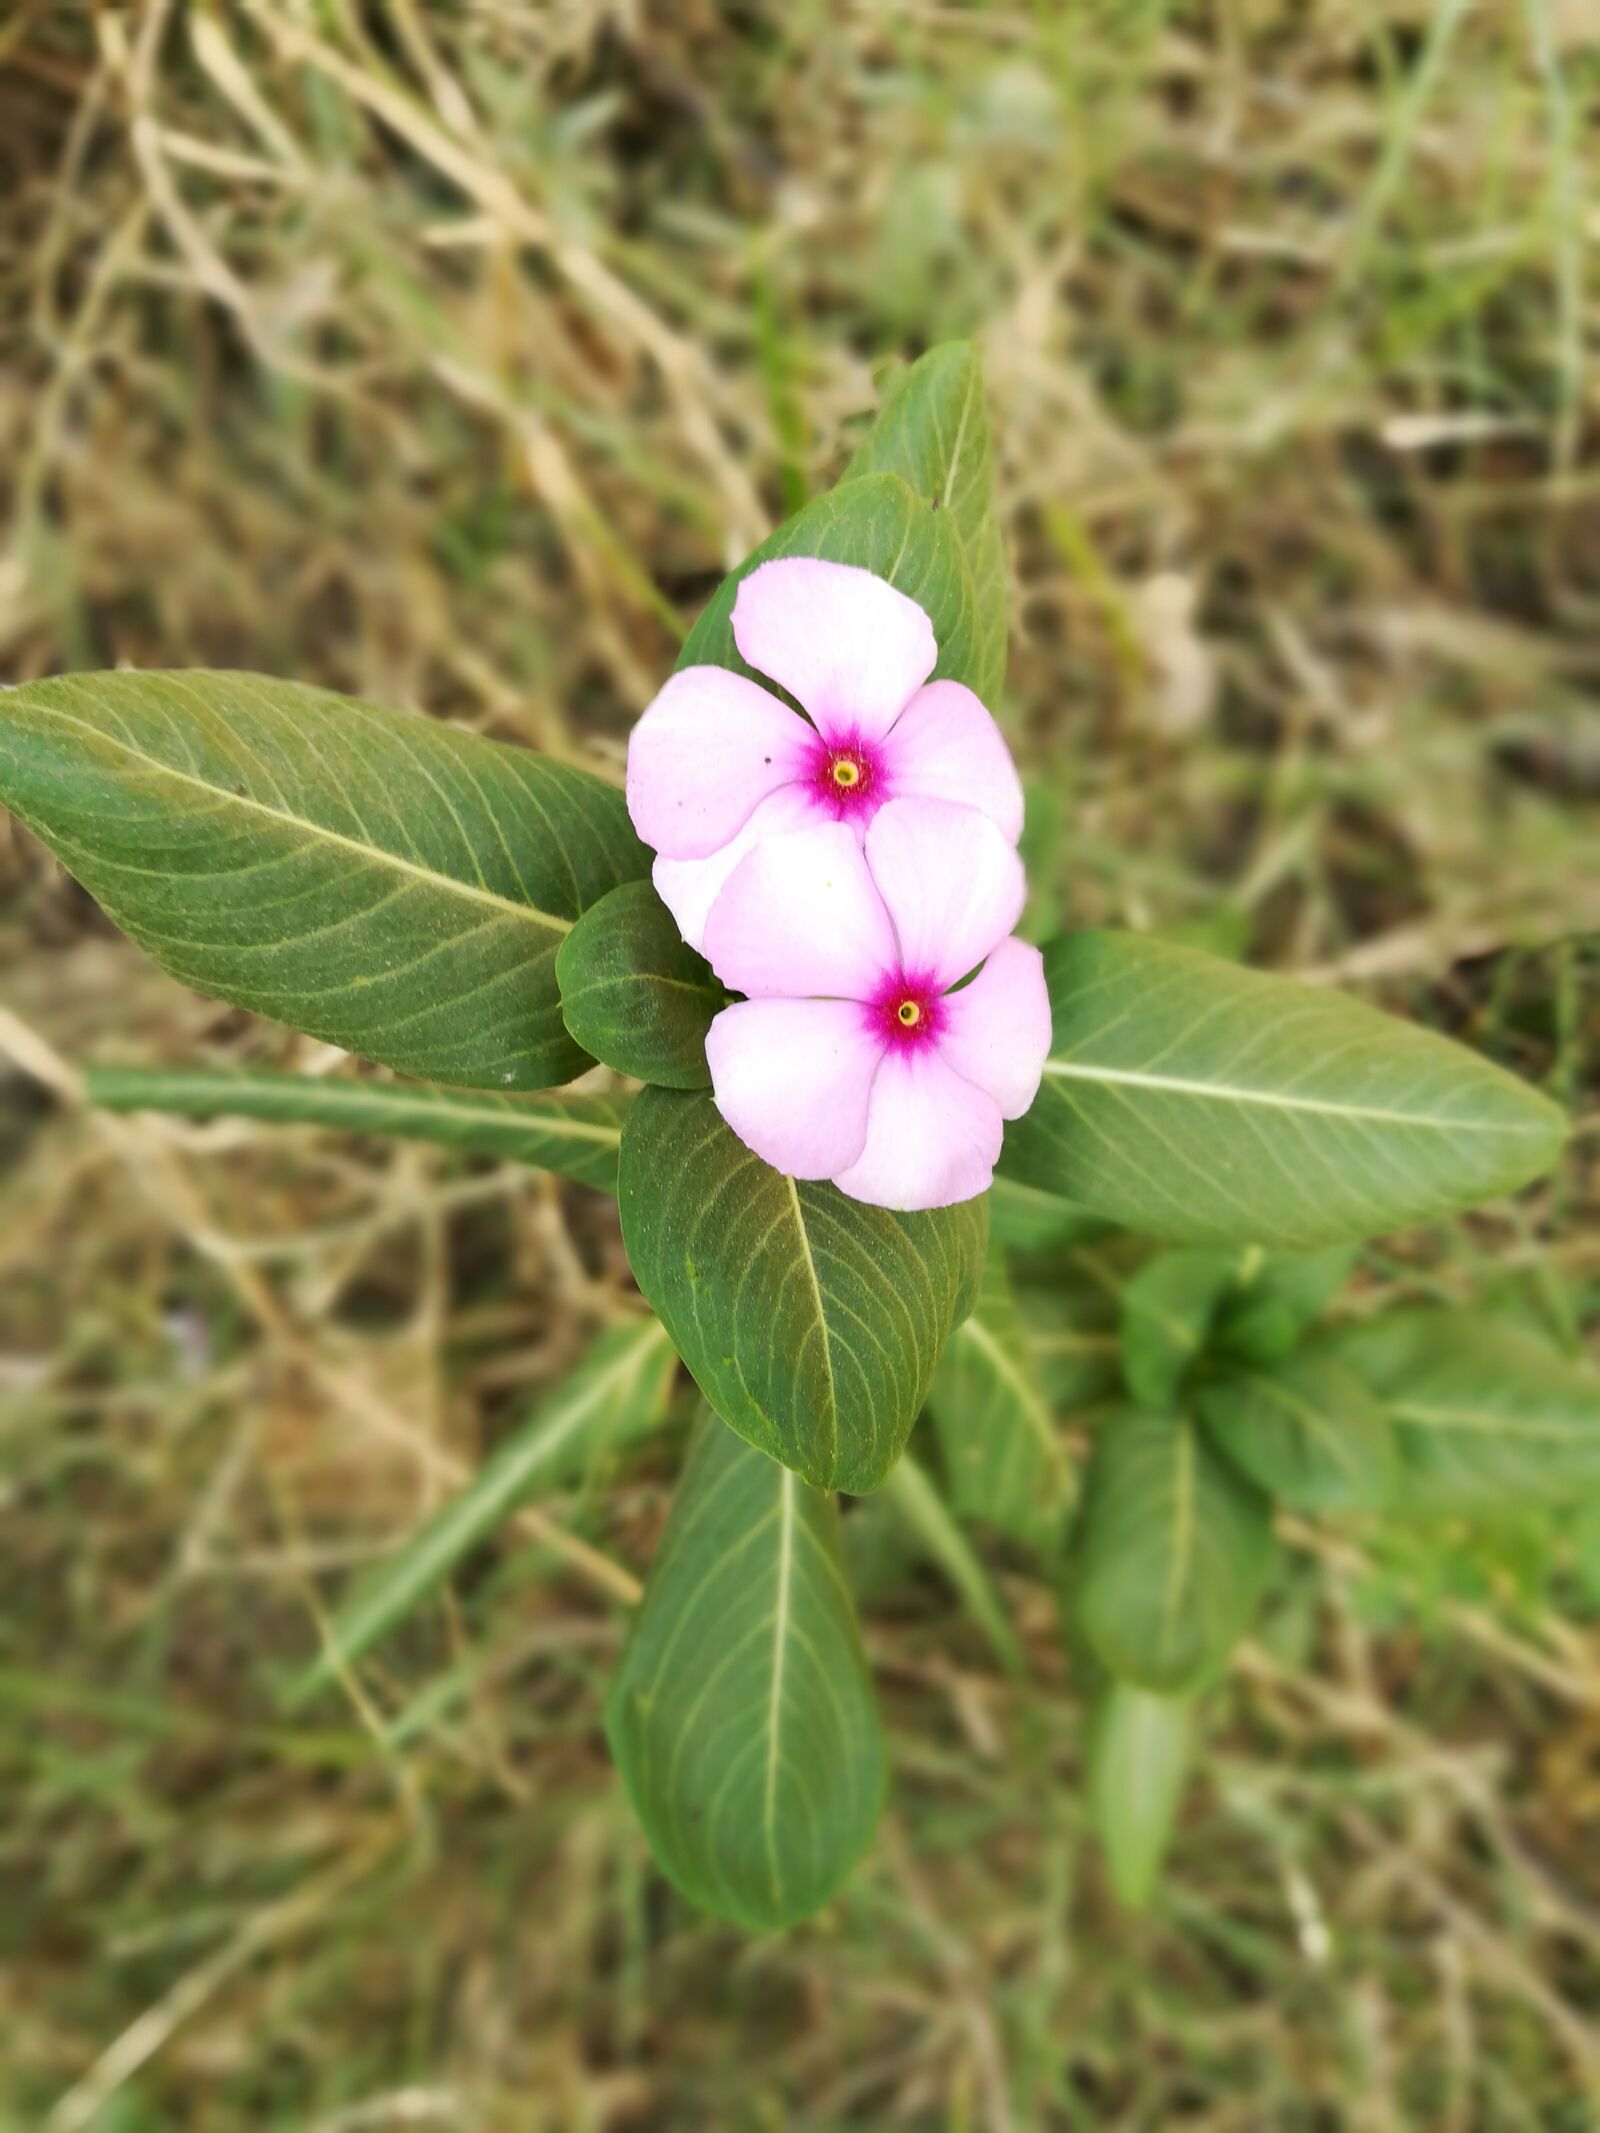 HUAWEI honor 6x sample photo. Flowers, pink photography